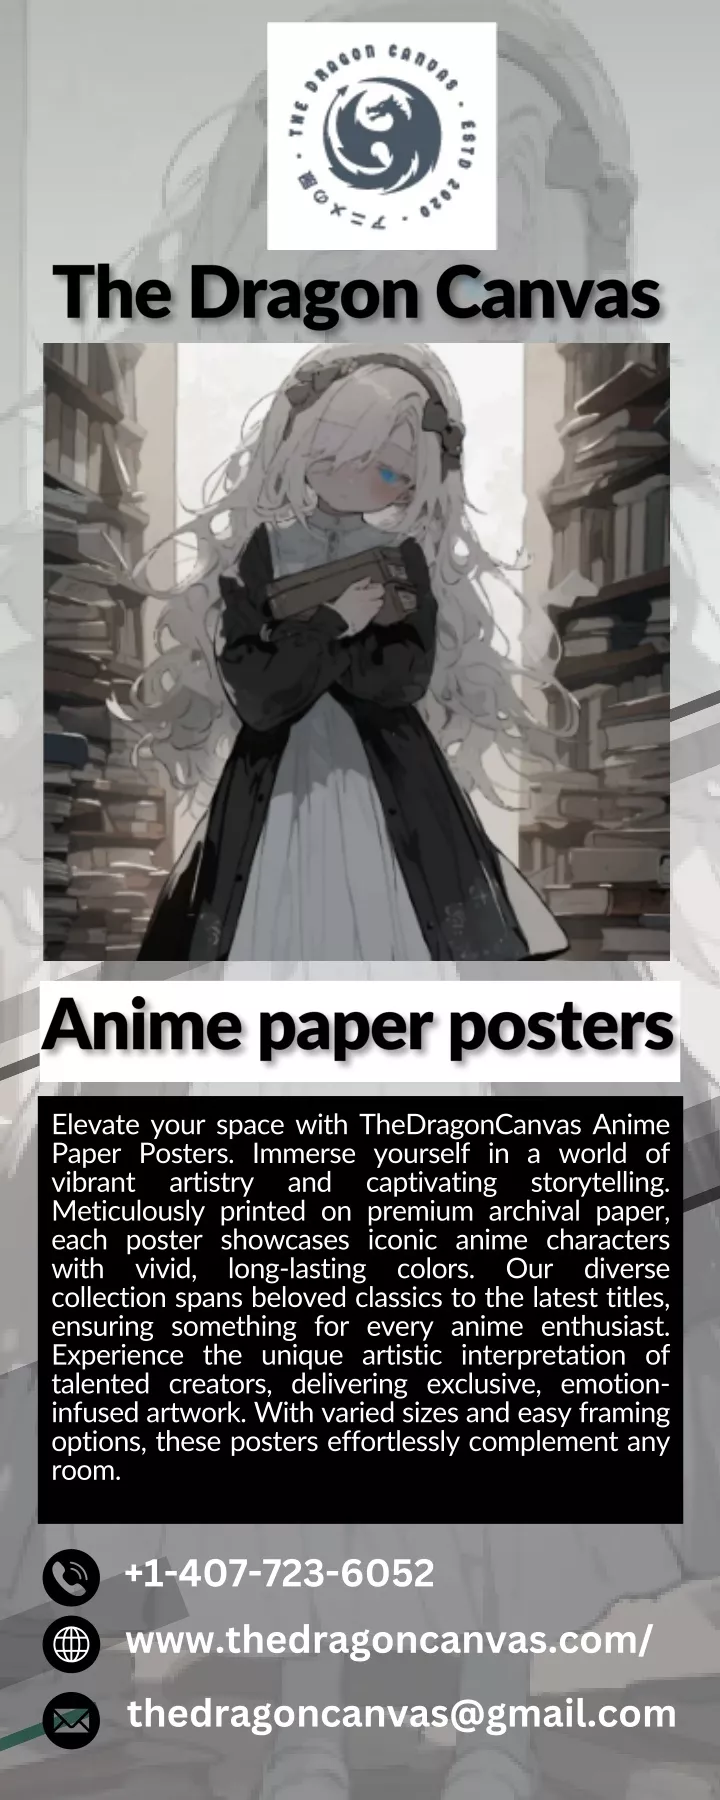 elevate your space with thedragoncanvas anime